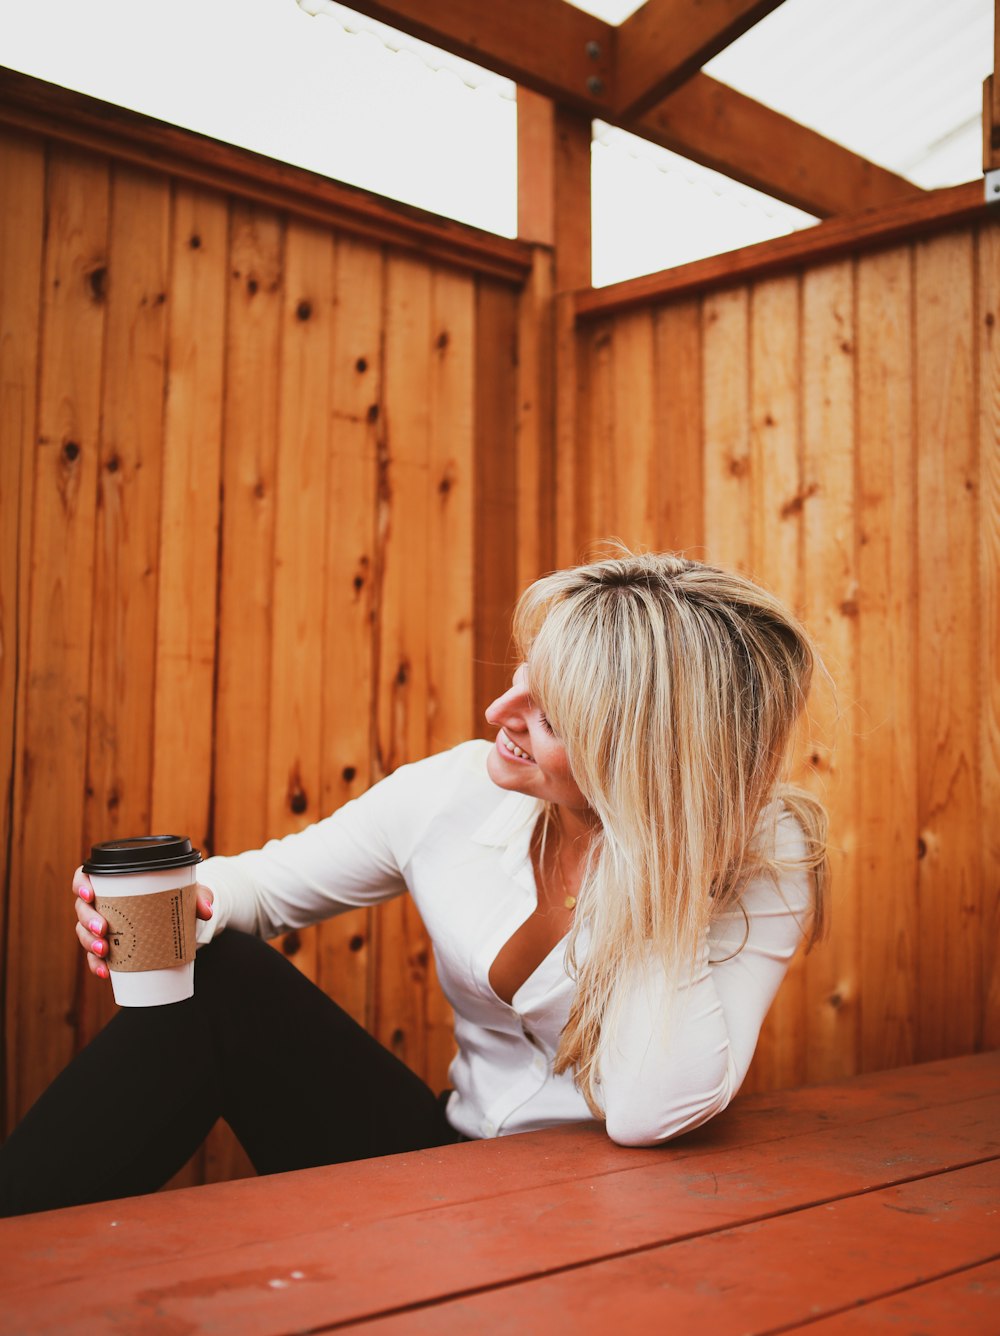 a woman sitting on a wooden bench holding a cup of coffee